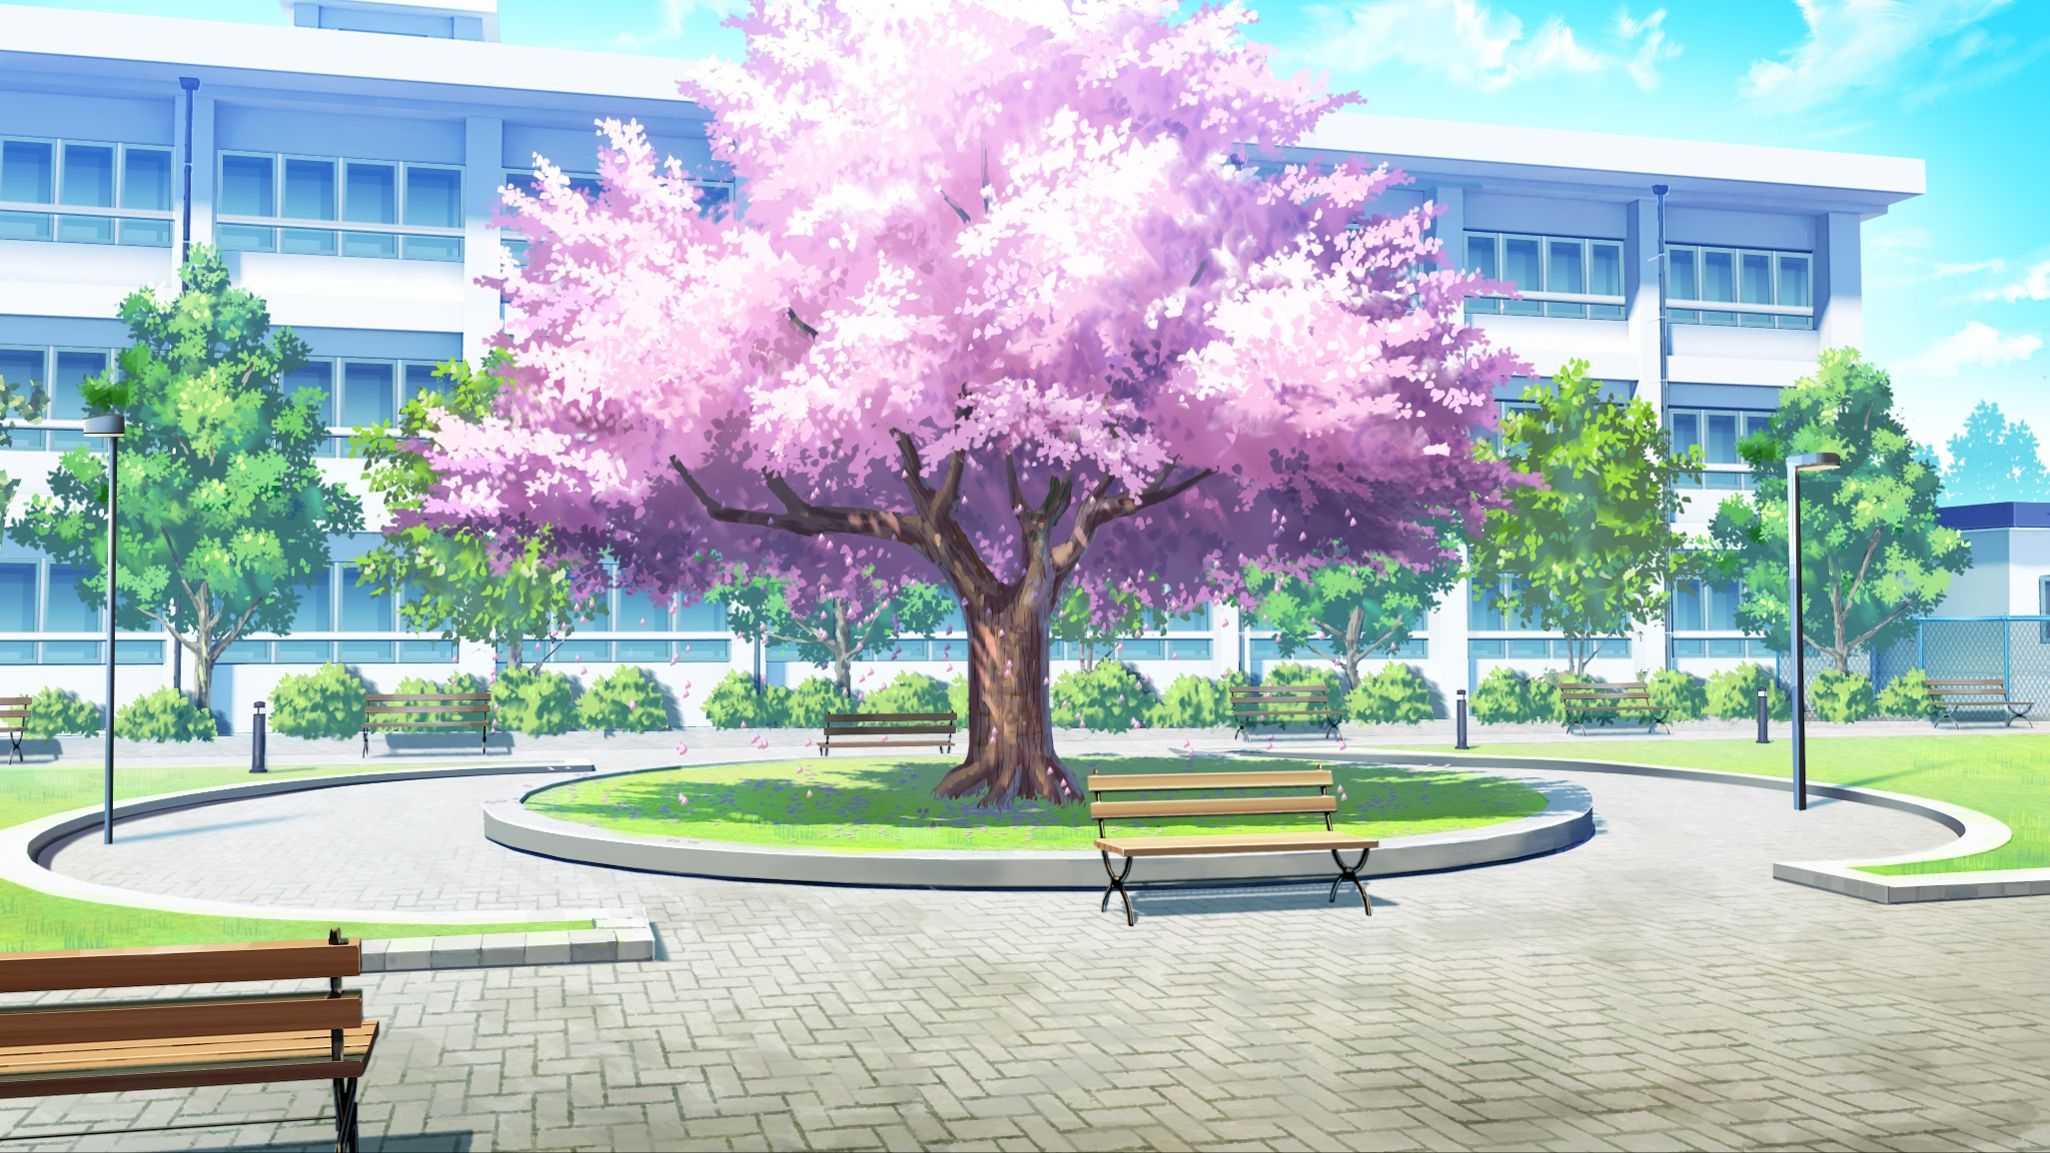 Anime Colourful Garden Man 4K HD Wallpapers  HD Wallpapers  ID 30973